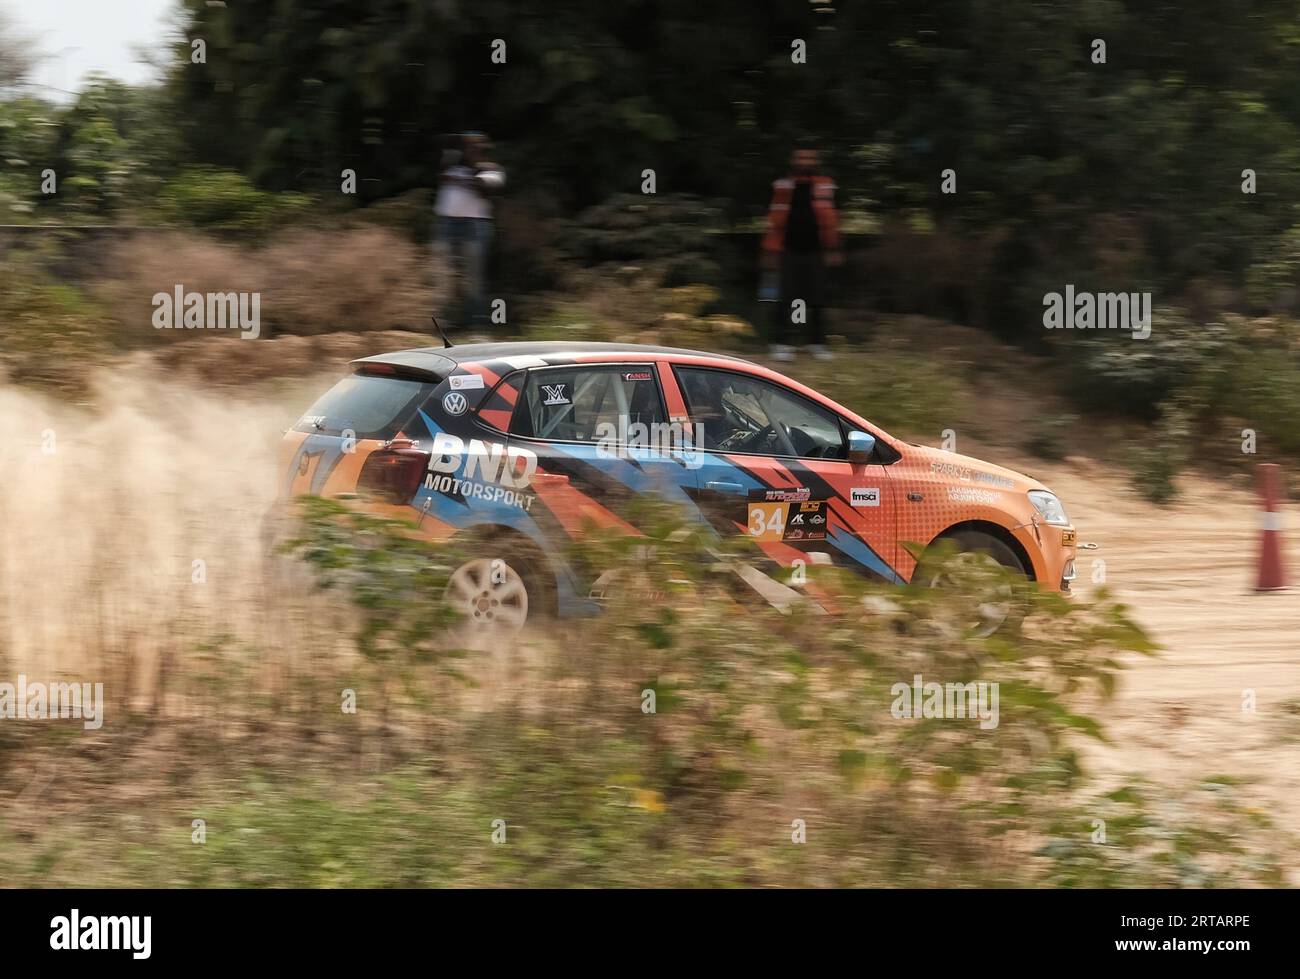 Orange Volkswagen Polo being driven through an autocross stage on dirt Stock Photo